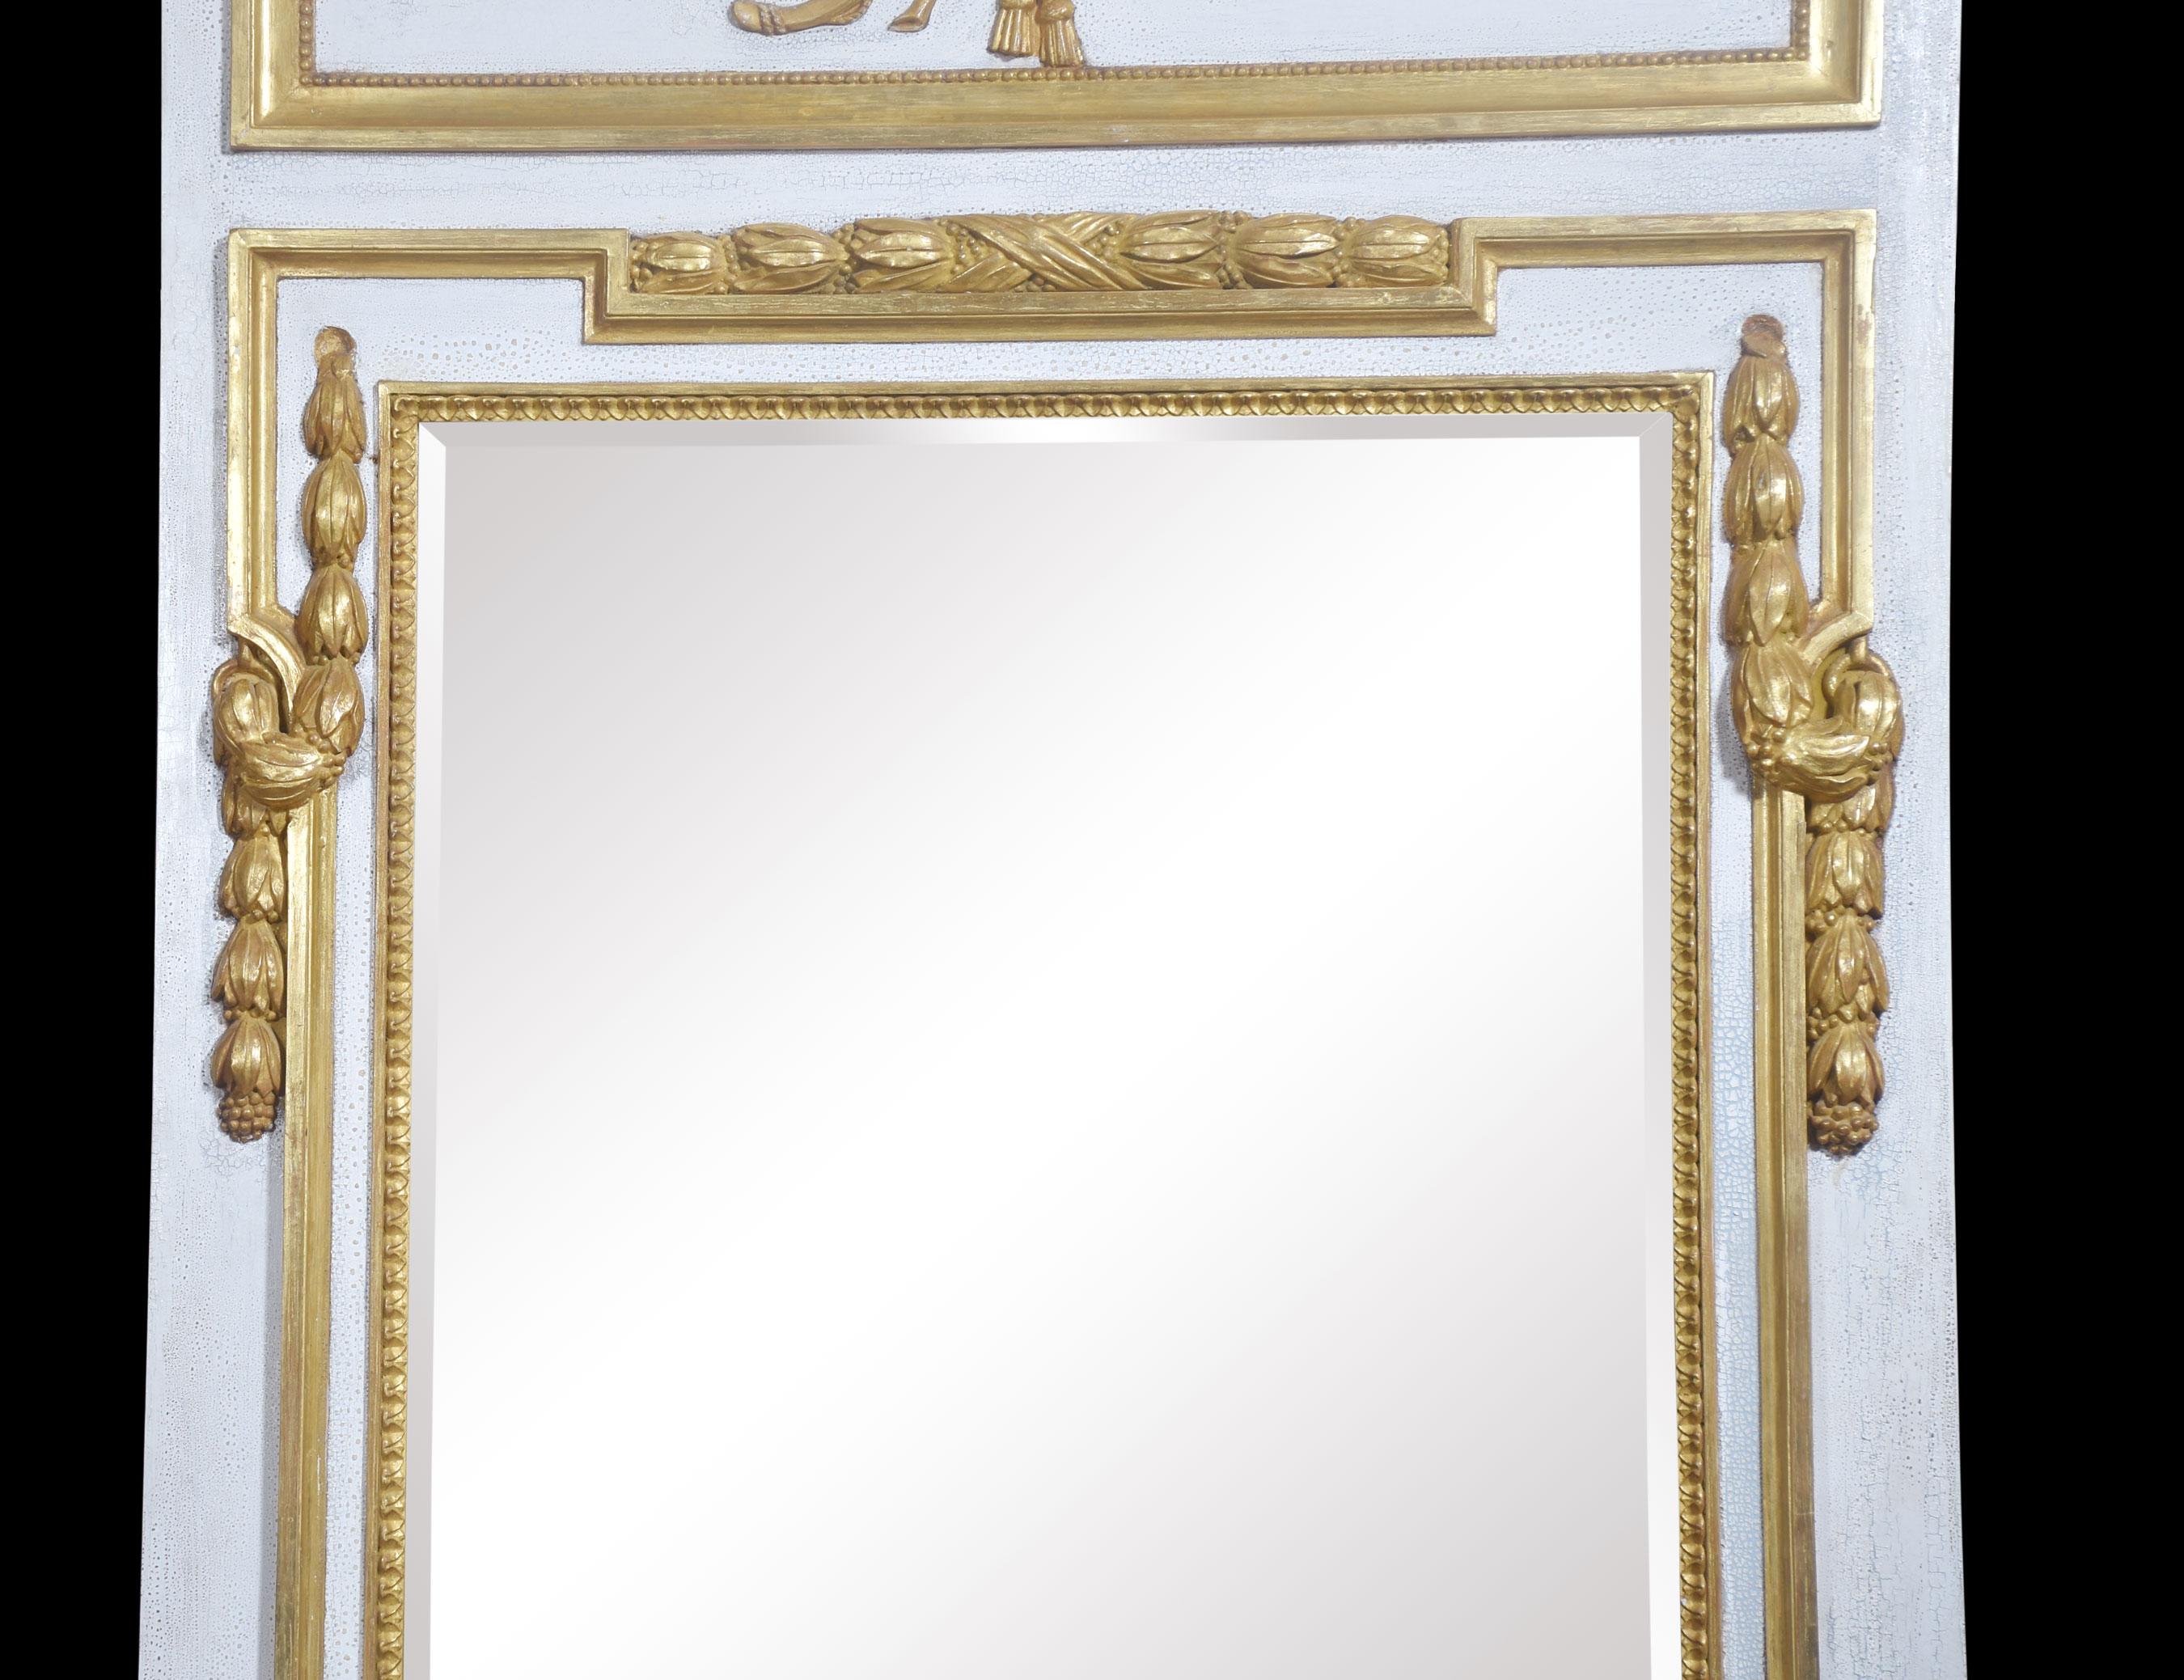 White painted wall mirror having carved flaming torch and quiver giltwood decoration, above the original bevelled mirror plate enclosed in gilt-wood border.
Dimensions
Height 79 Inches
Width 43 Inches
Depth 3.5 Inches